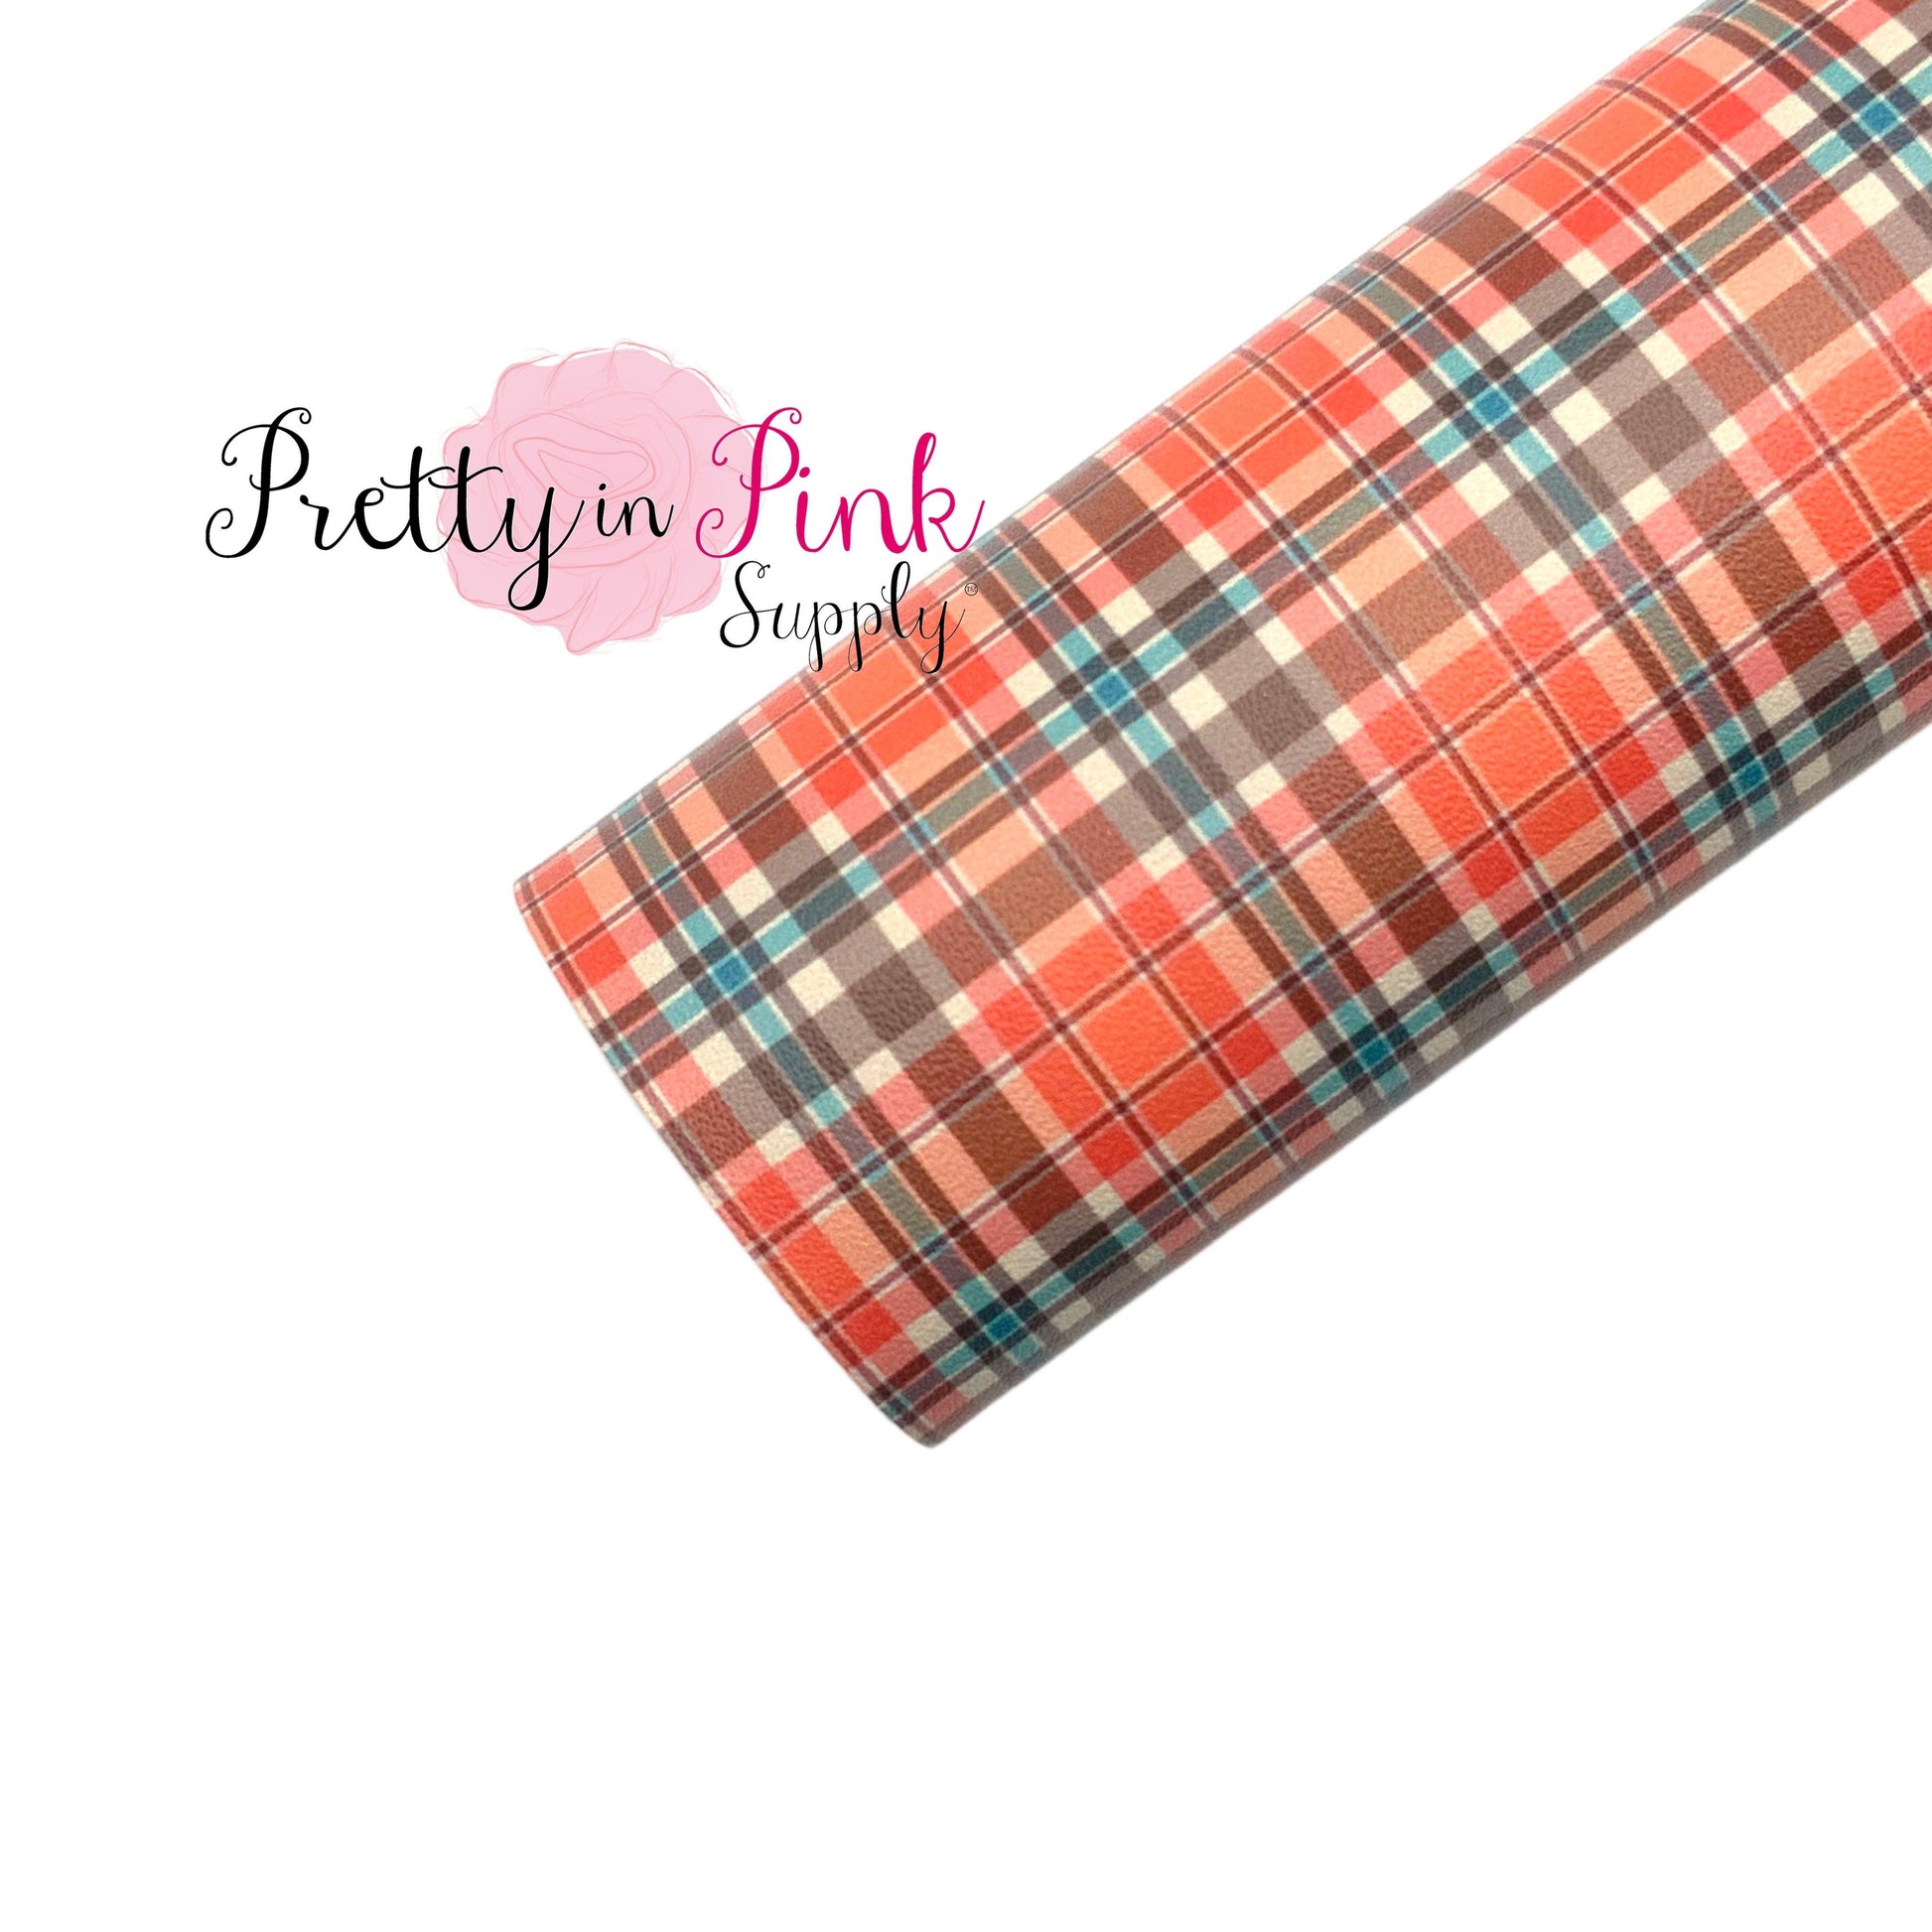 Rolled smooth faux leather sheet with autumn orange, brown, and teal plaid pattern.